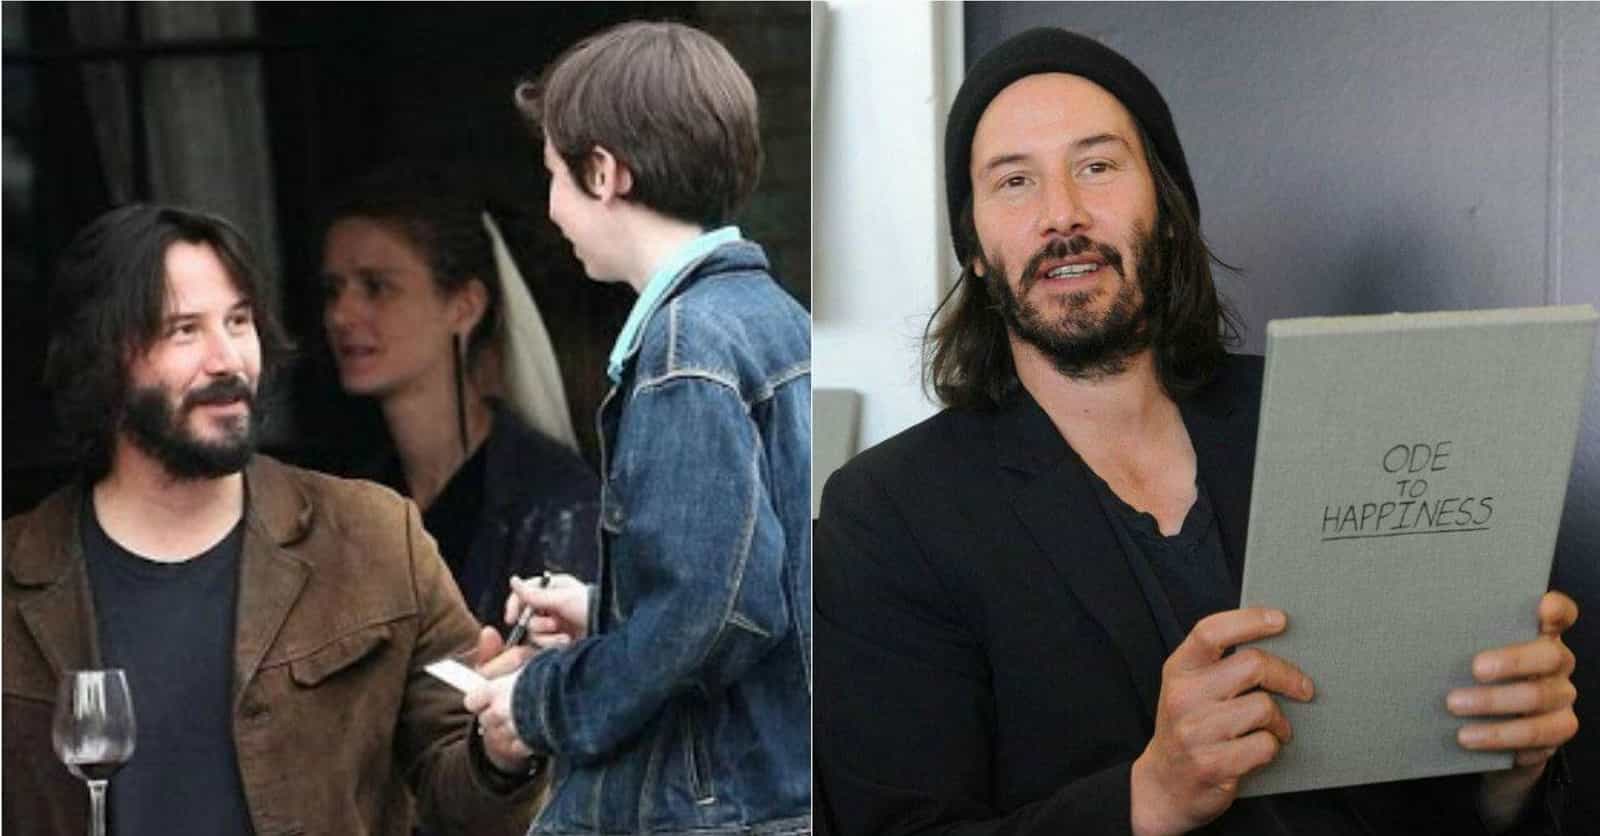 People Shared Their Experiences Meeting Keanu Reeves, And He's Just A Delight